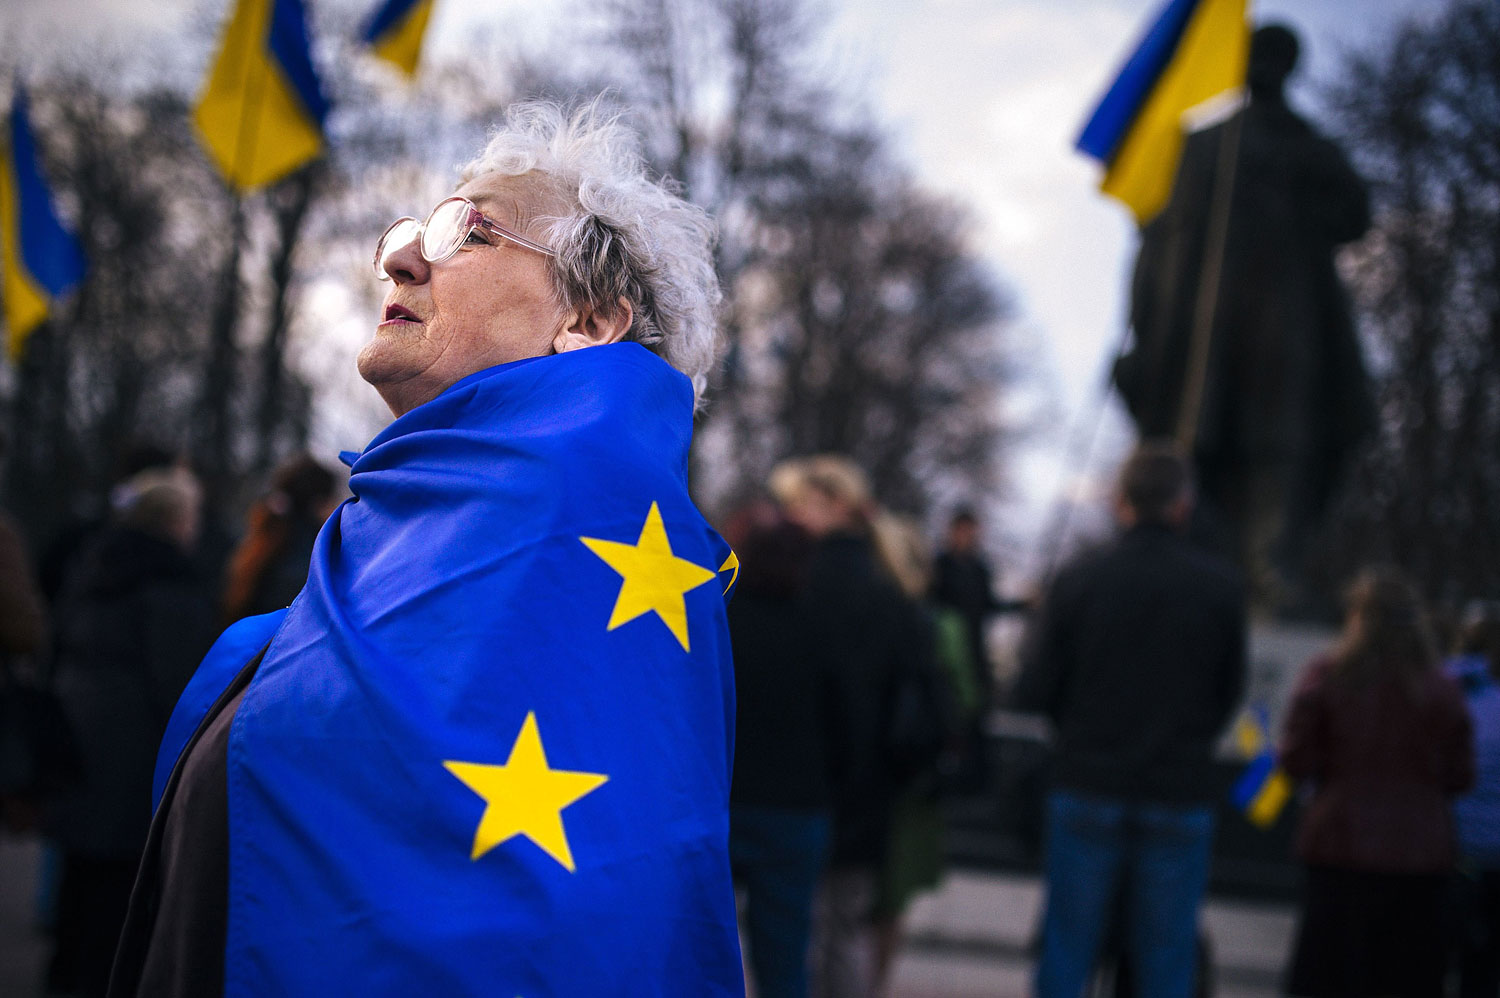 An elderly woman wrapped with an European Union flag attends a pro-Ukraine rally in the eastern Ukrainian city of Lugansk on April 15, 2014. 